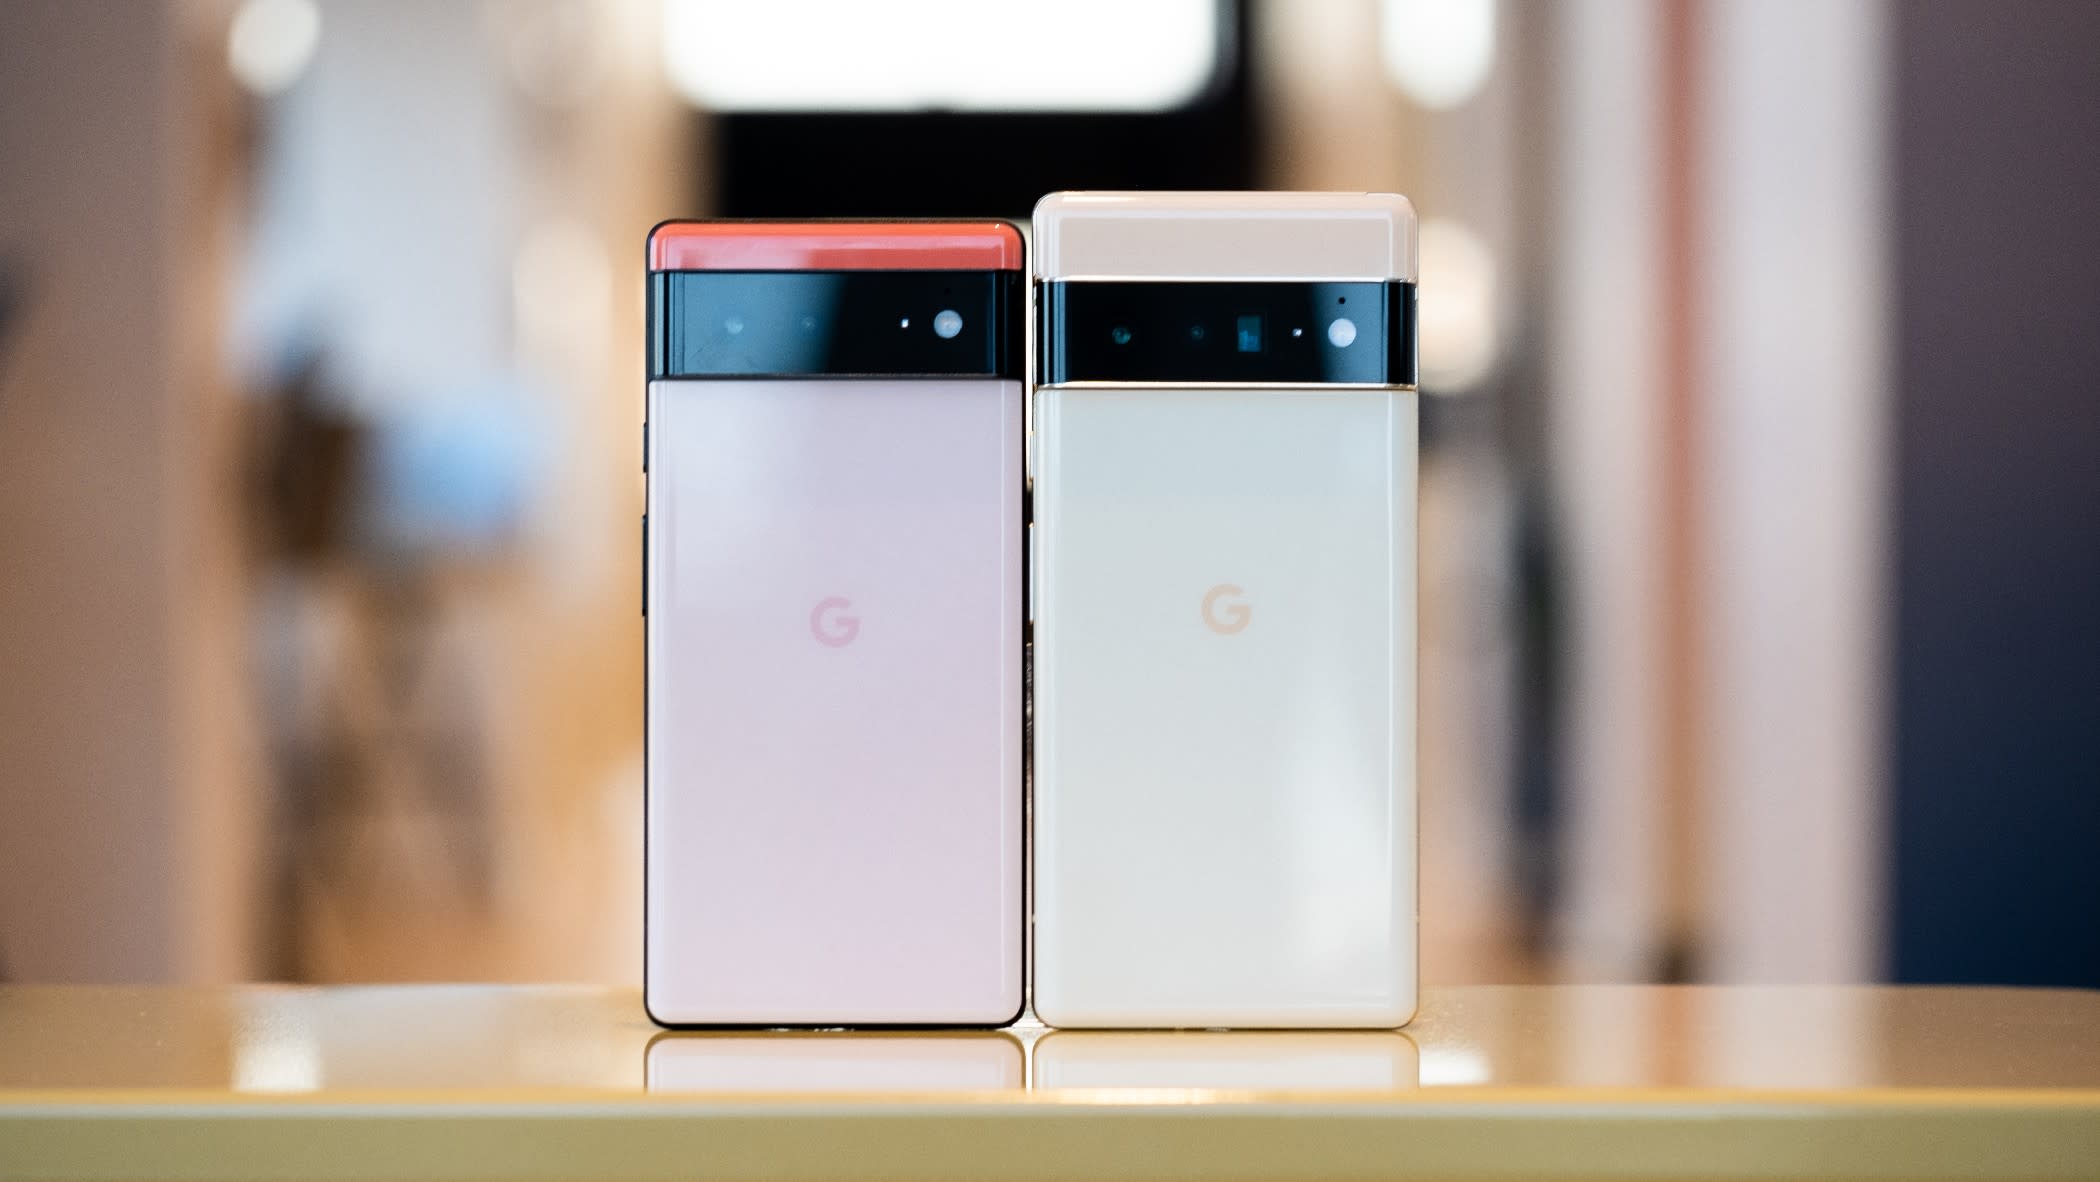 oneplus-6-vs-google-pixel-2-xl-what-difference-does-300-make